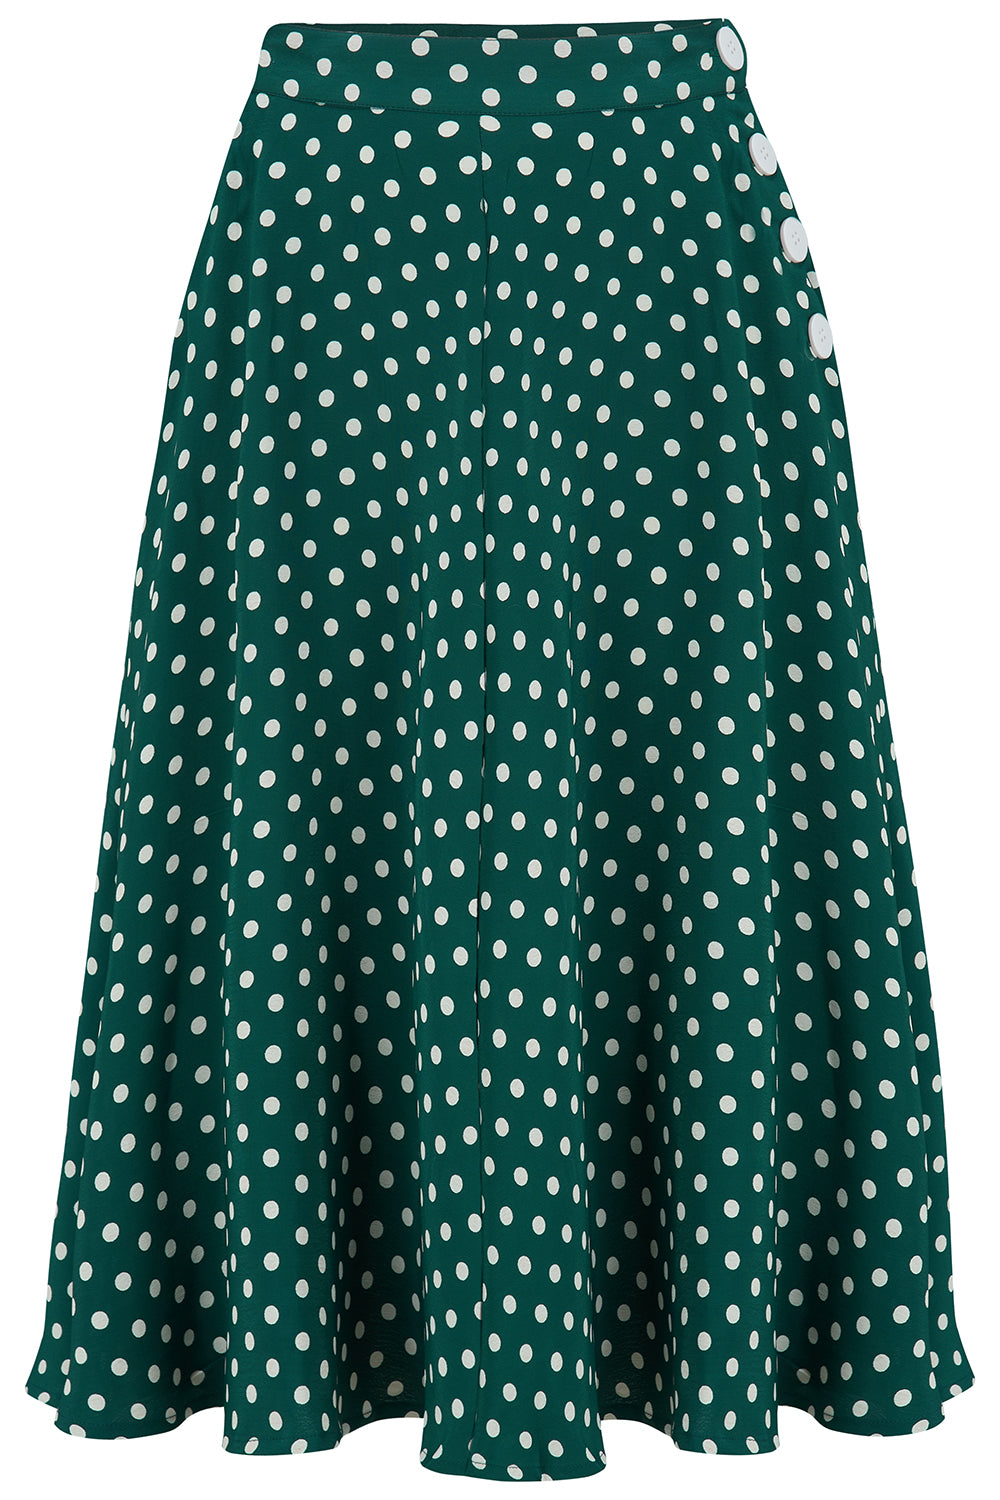 "Isabelle" Skirt in Green Polka , Classic & Authentic 1940s Vintage Inspired Style - CC41, Goodwood Revival, Twinwood Festival, Viva Las Vegas Rockabilly Weekend Rock n Romance The Seamstress Of Bloomsbury